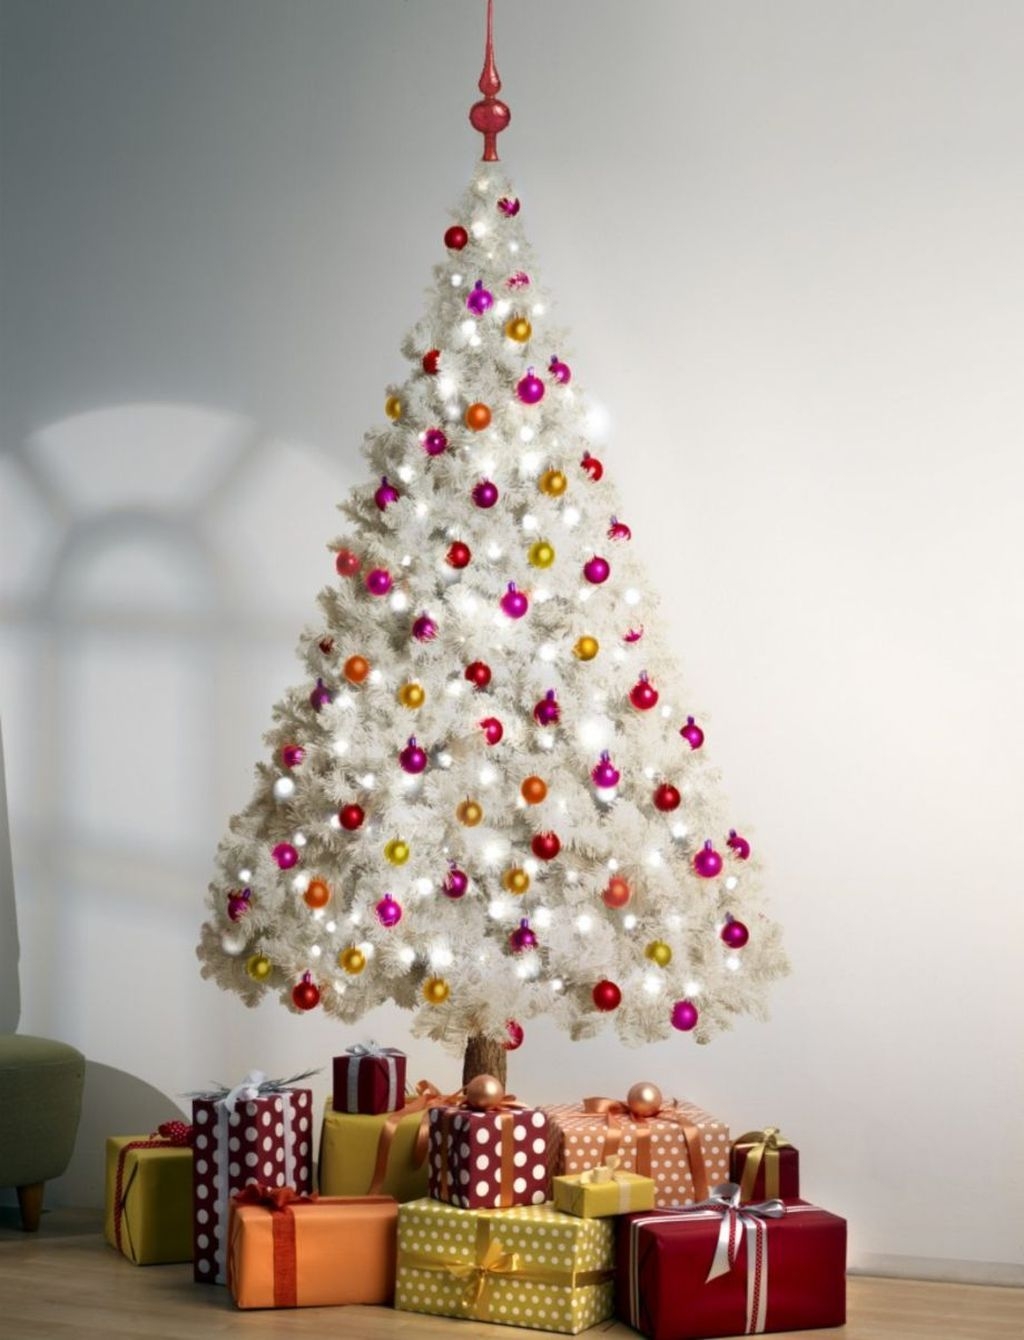 Inspiring Home Decoration Ideas With Small Christmas Tree 09